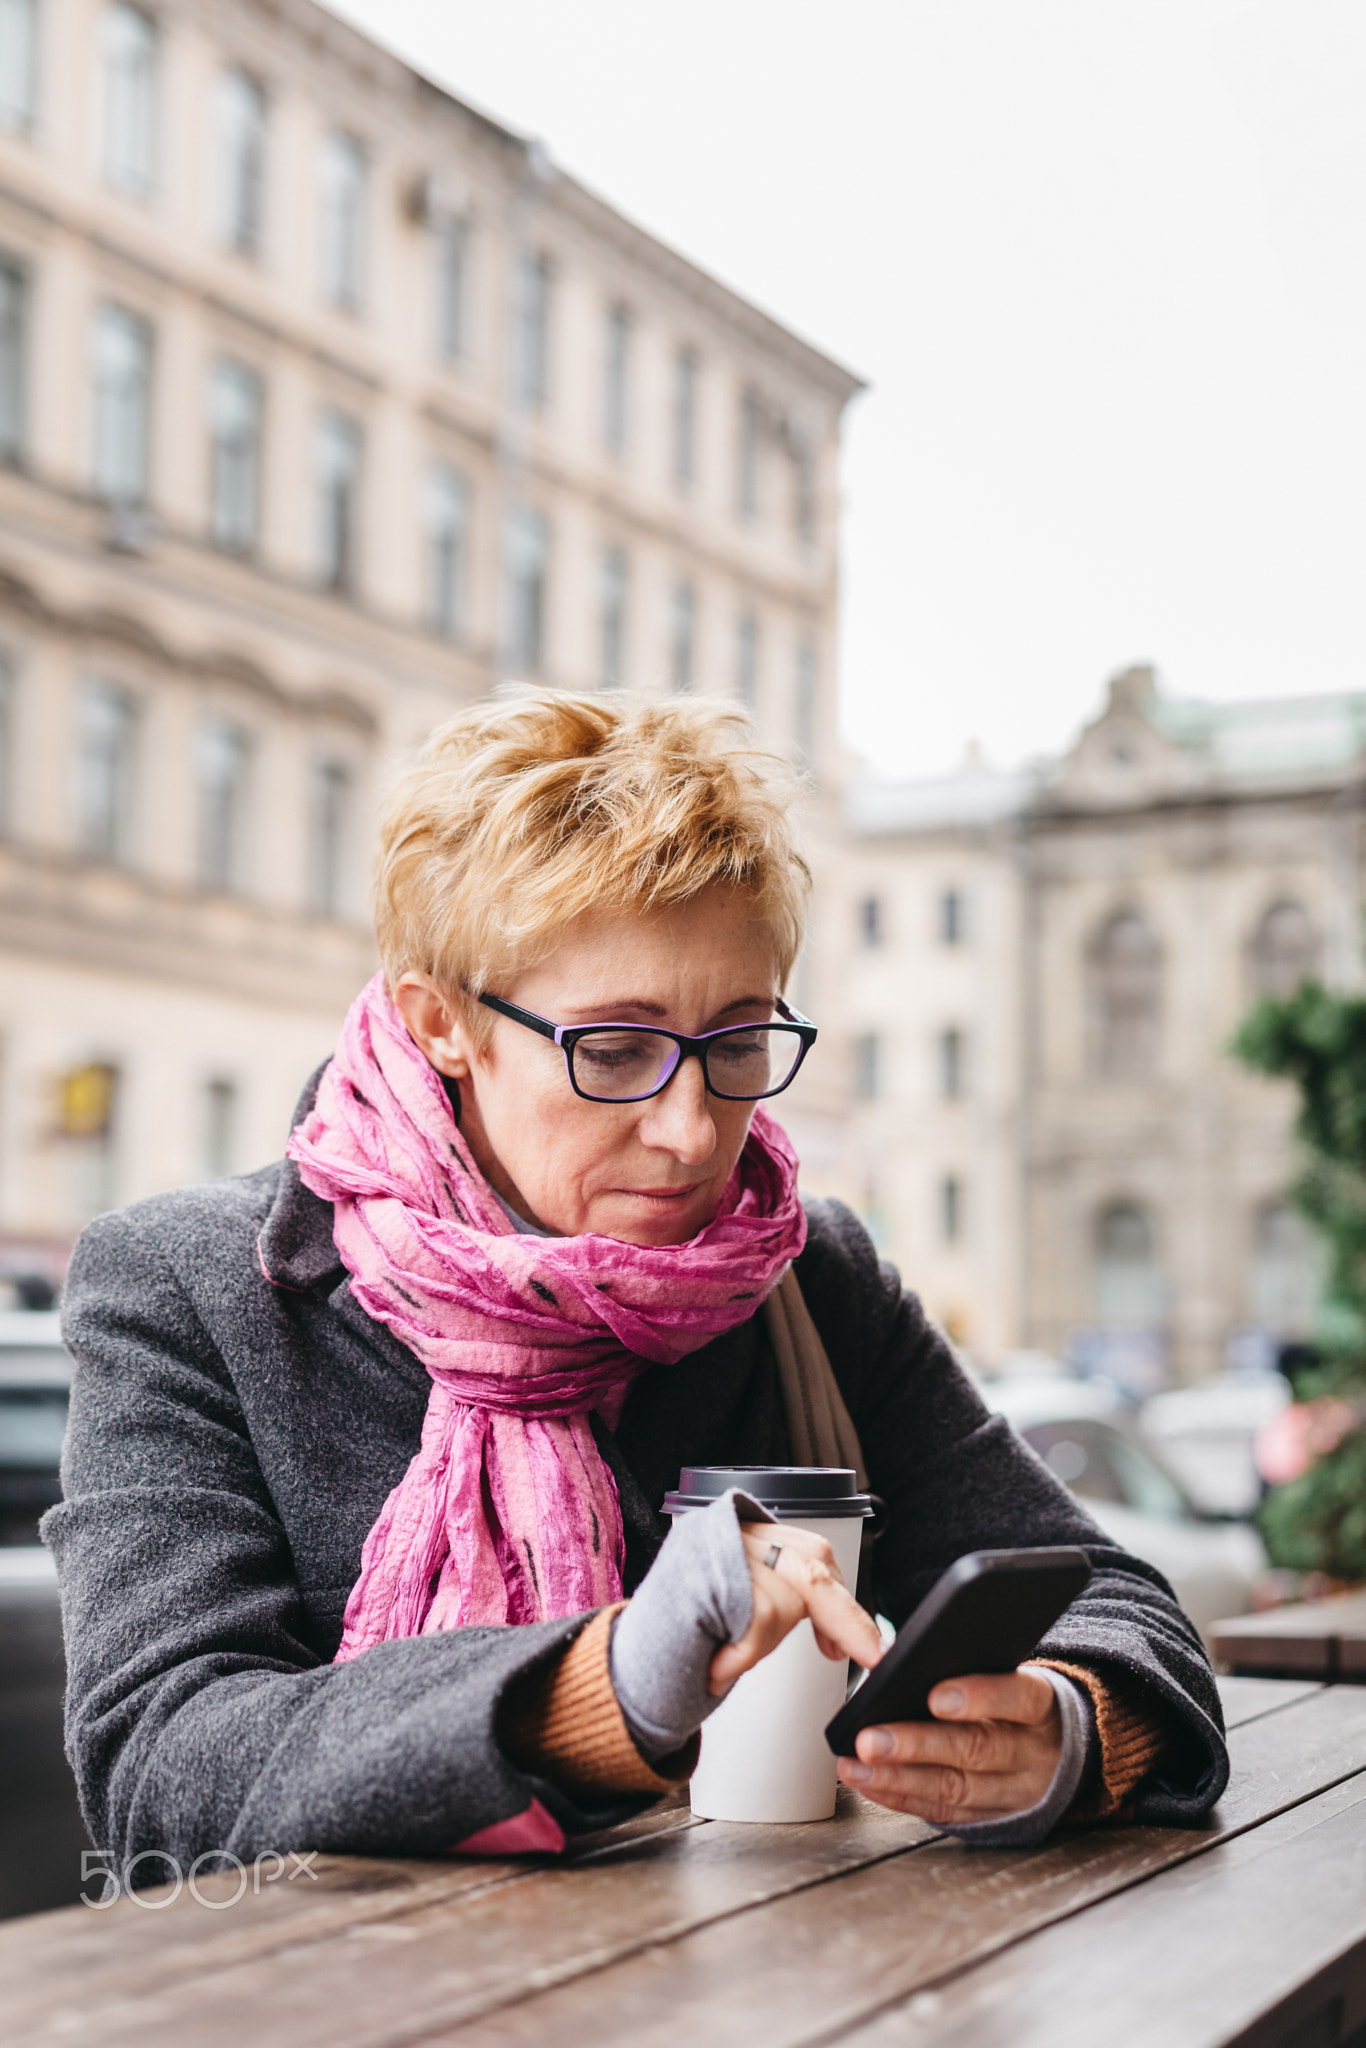 Woman browsing smartphone in outside cafe